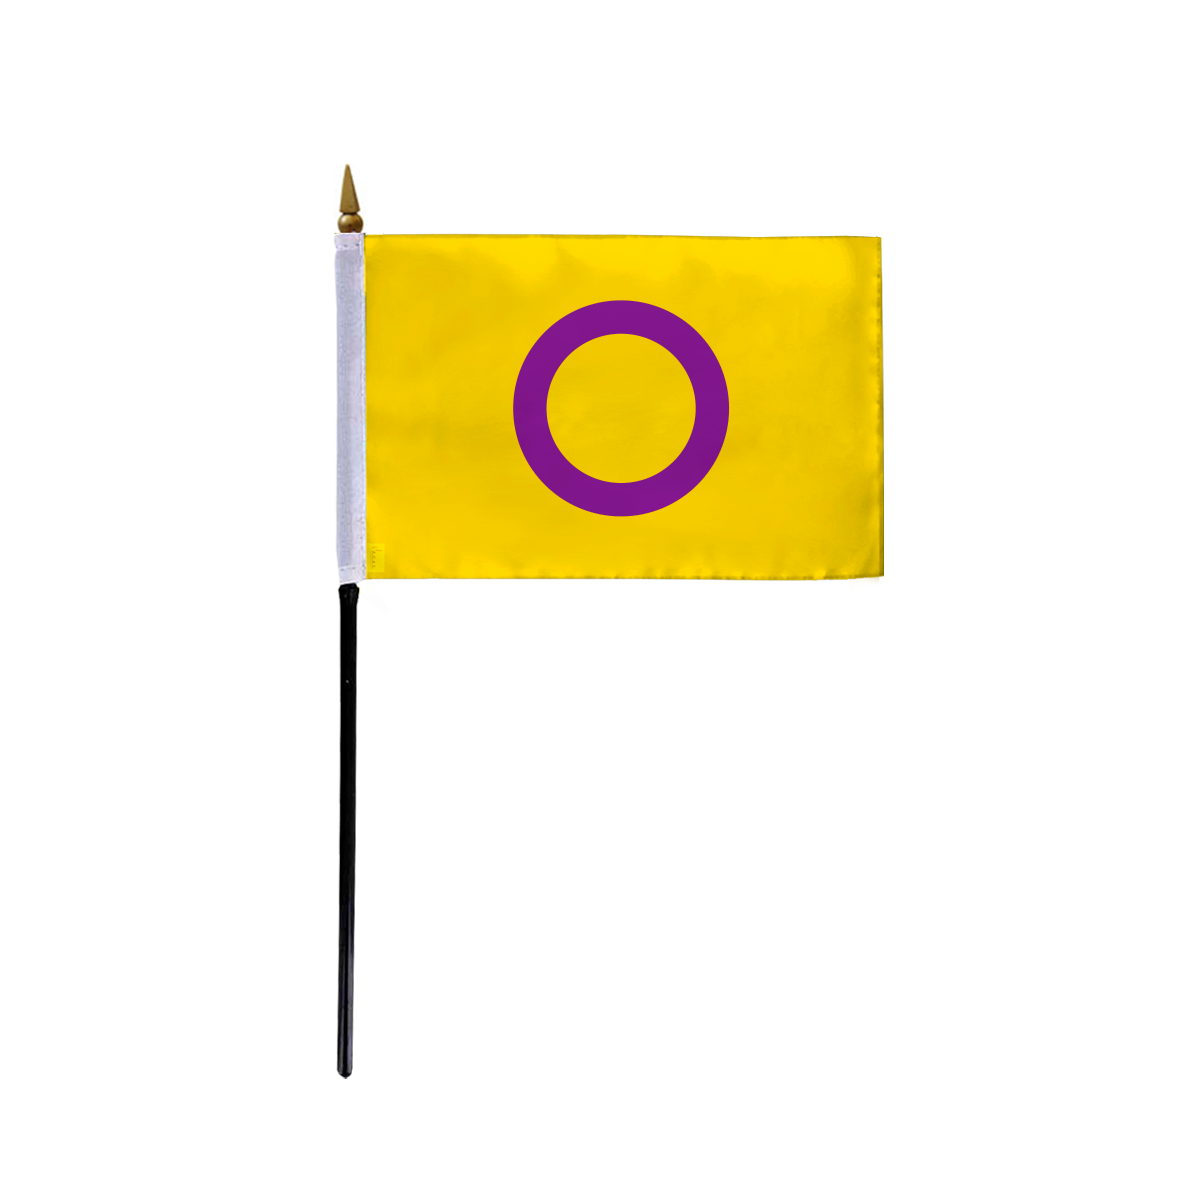 AGAS Small Intersex Flag 4x6 inch Flag on a 11 inch Plastic Stick